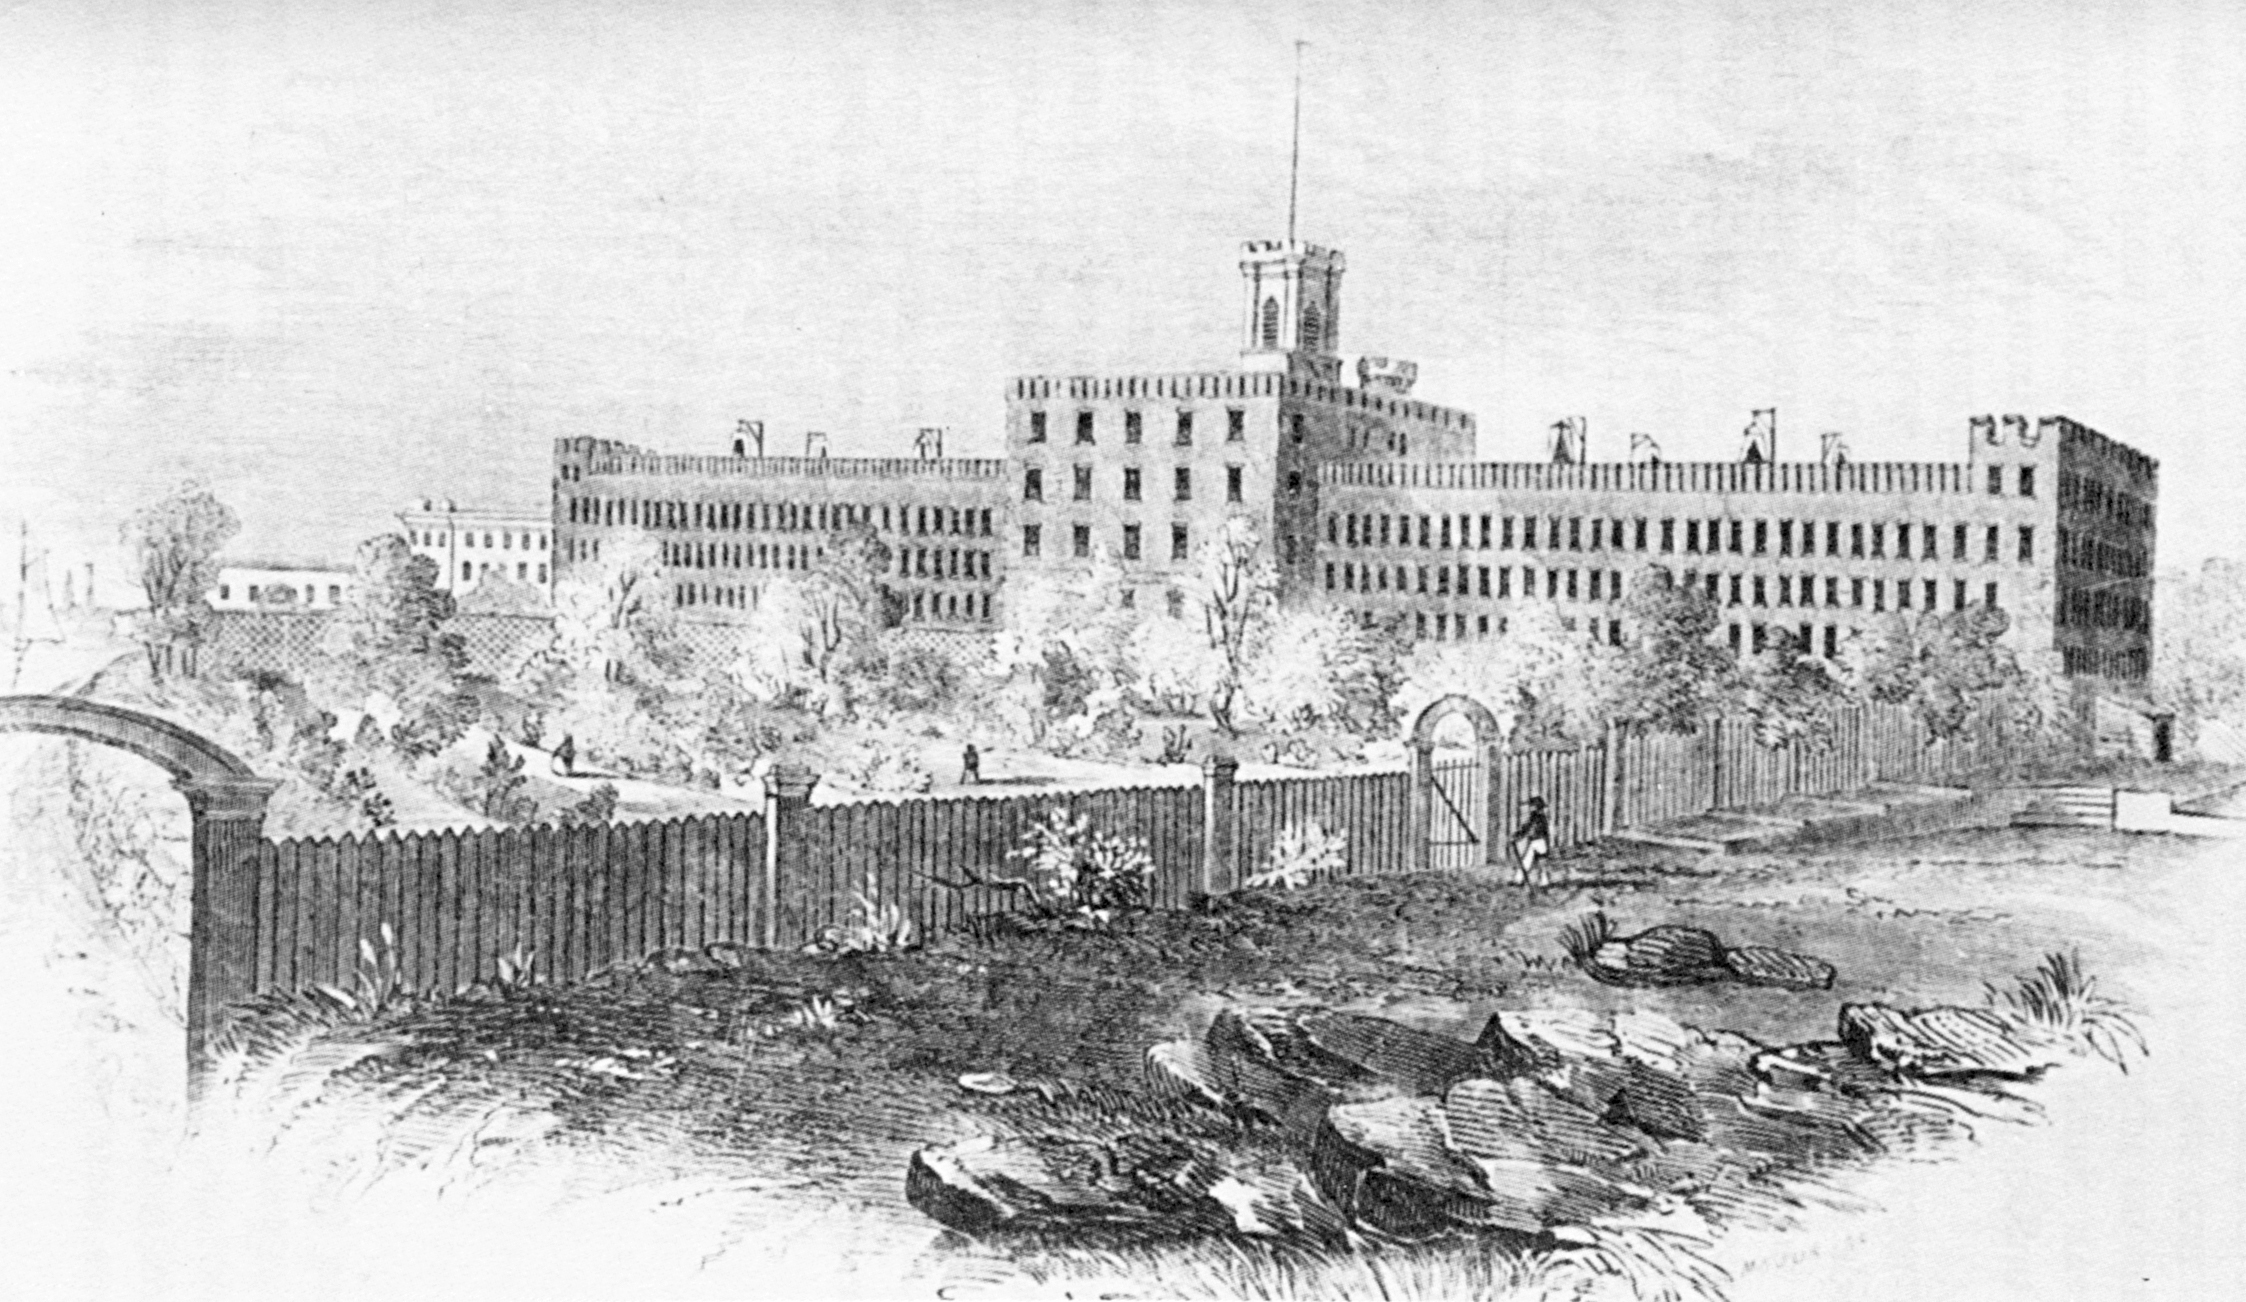 Black and white sketch of Blackwell's Island Prison